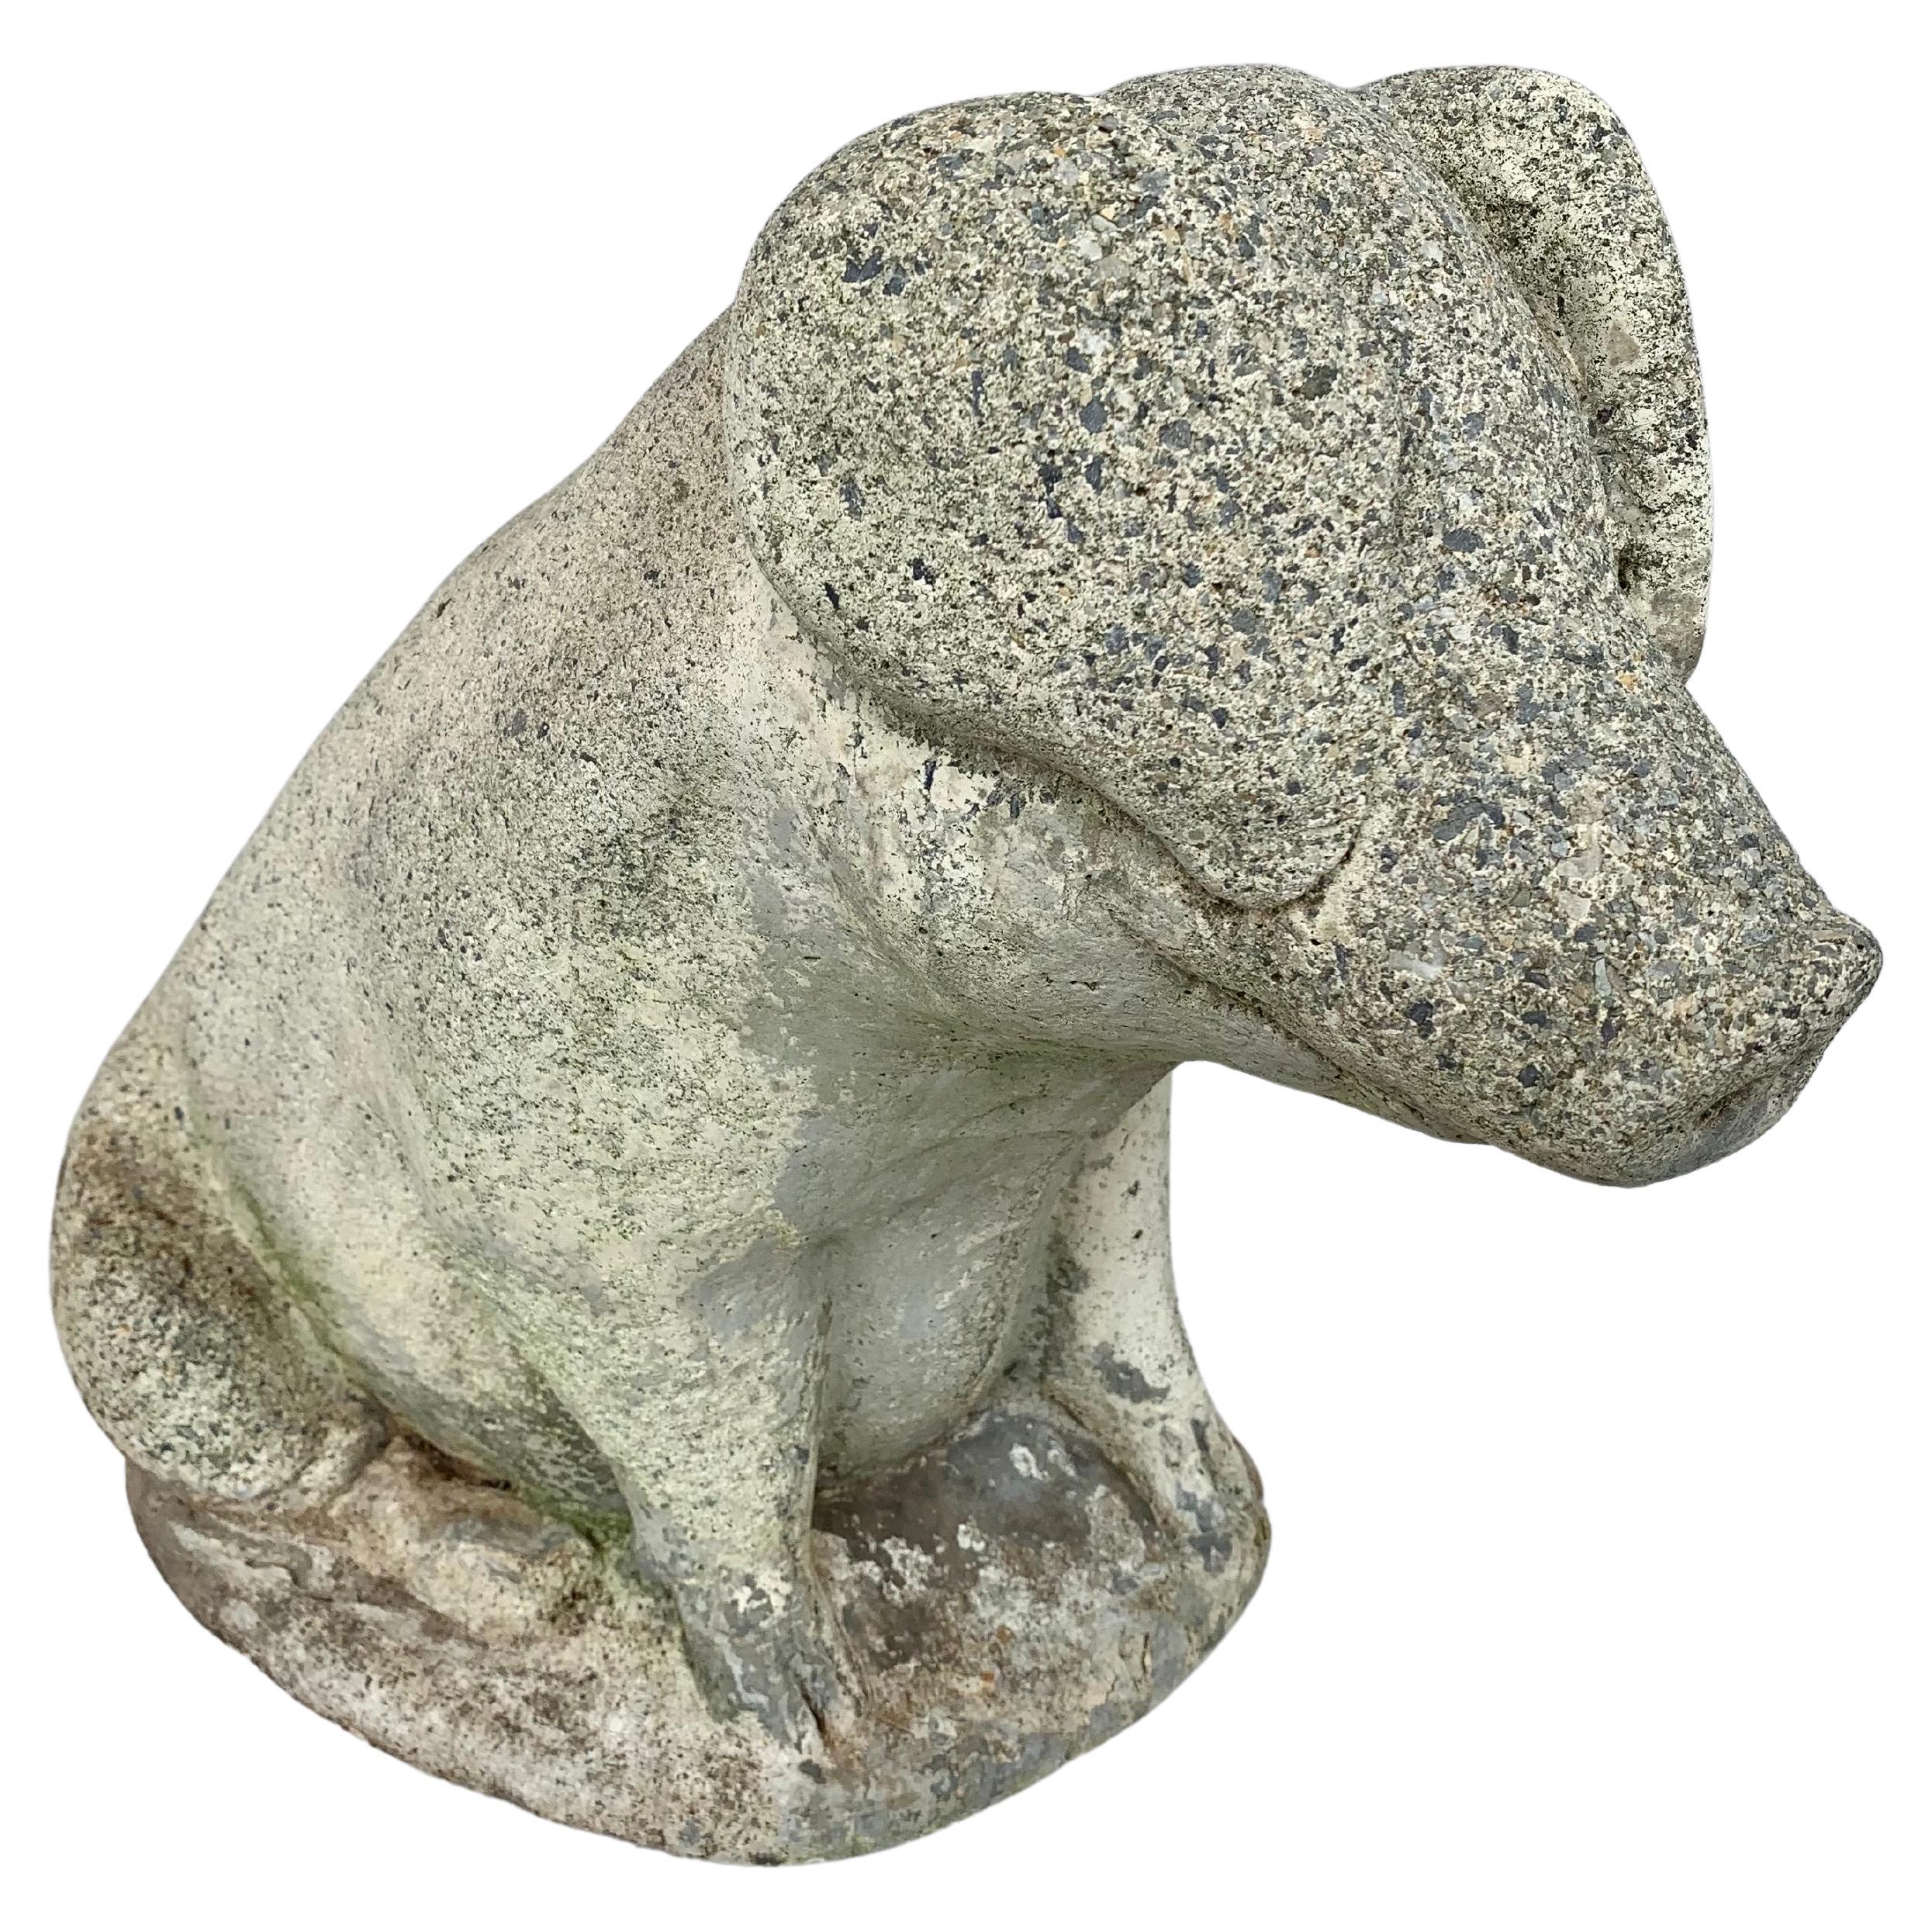 Decorate a kitchen counter or a patio with this adorable concrete pig. Made of concrete, the pig has a rich weathered texture finish and a wonderful patina. For indoor or outdoor use. Felt pads have been placed on the underside for ease of placing